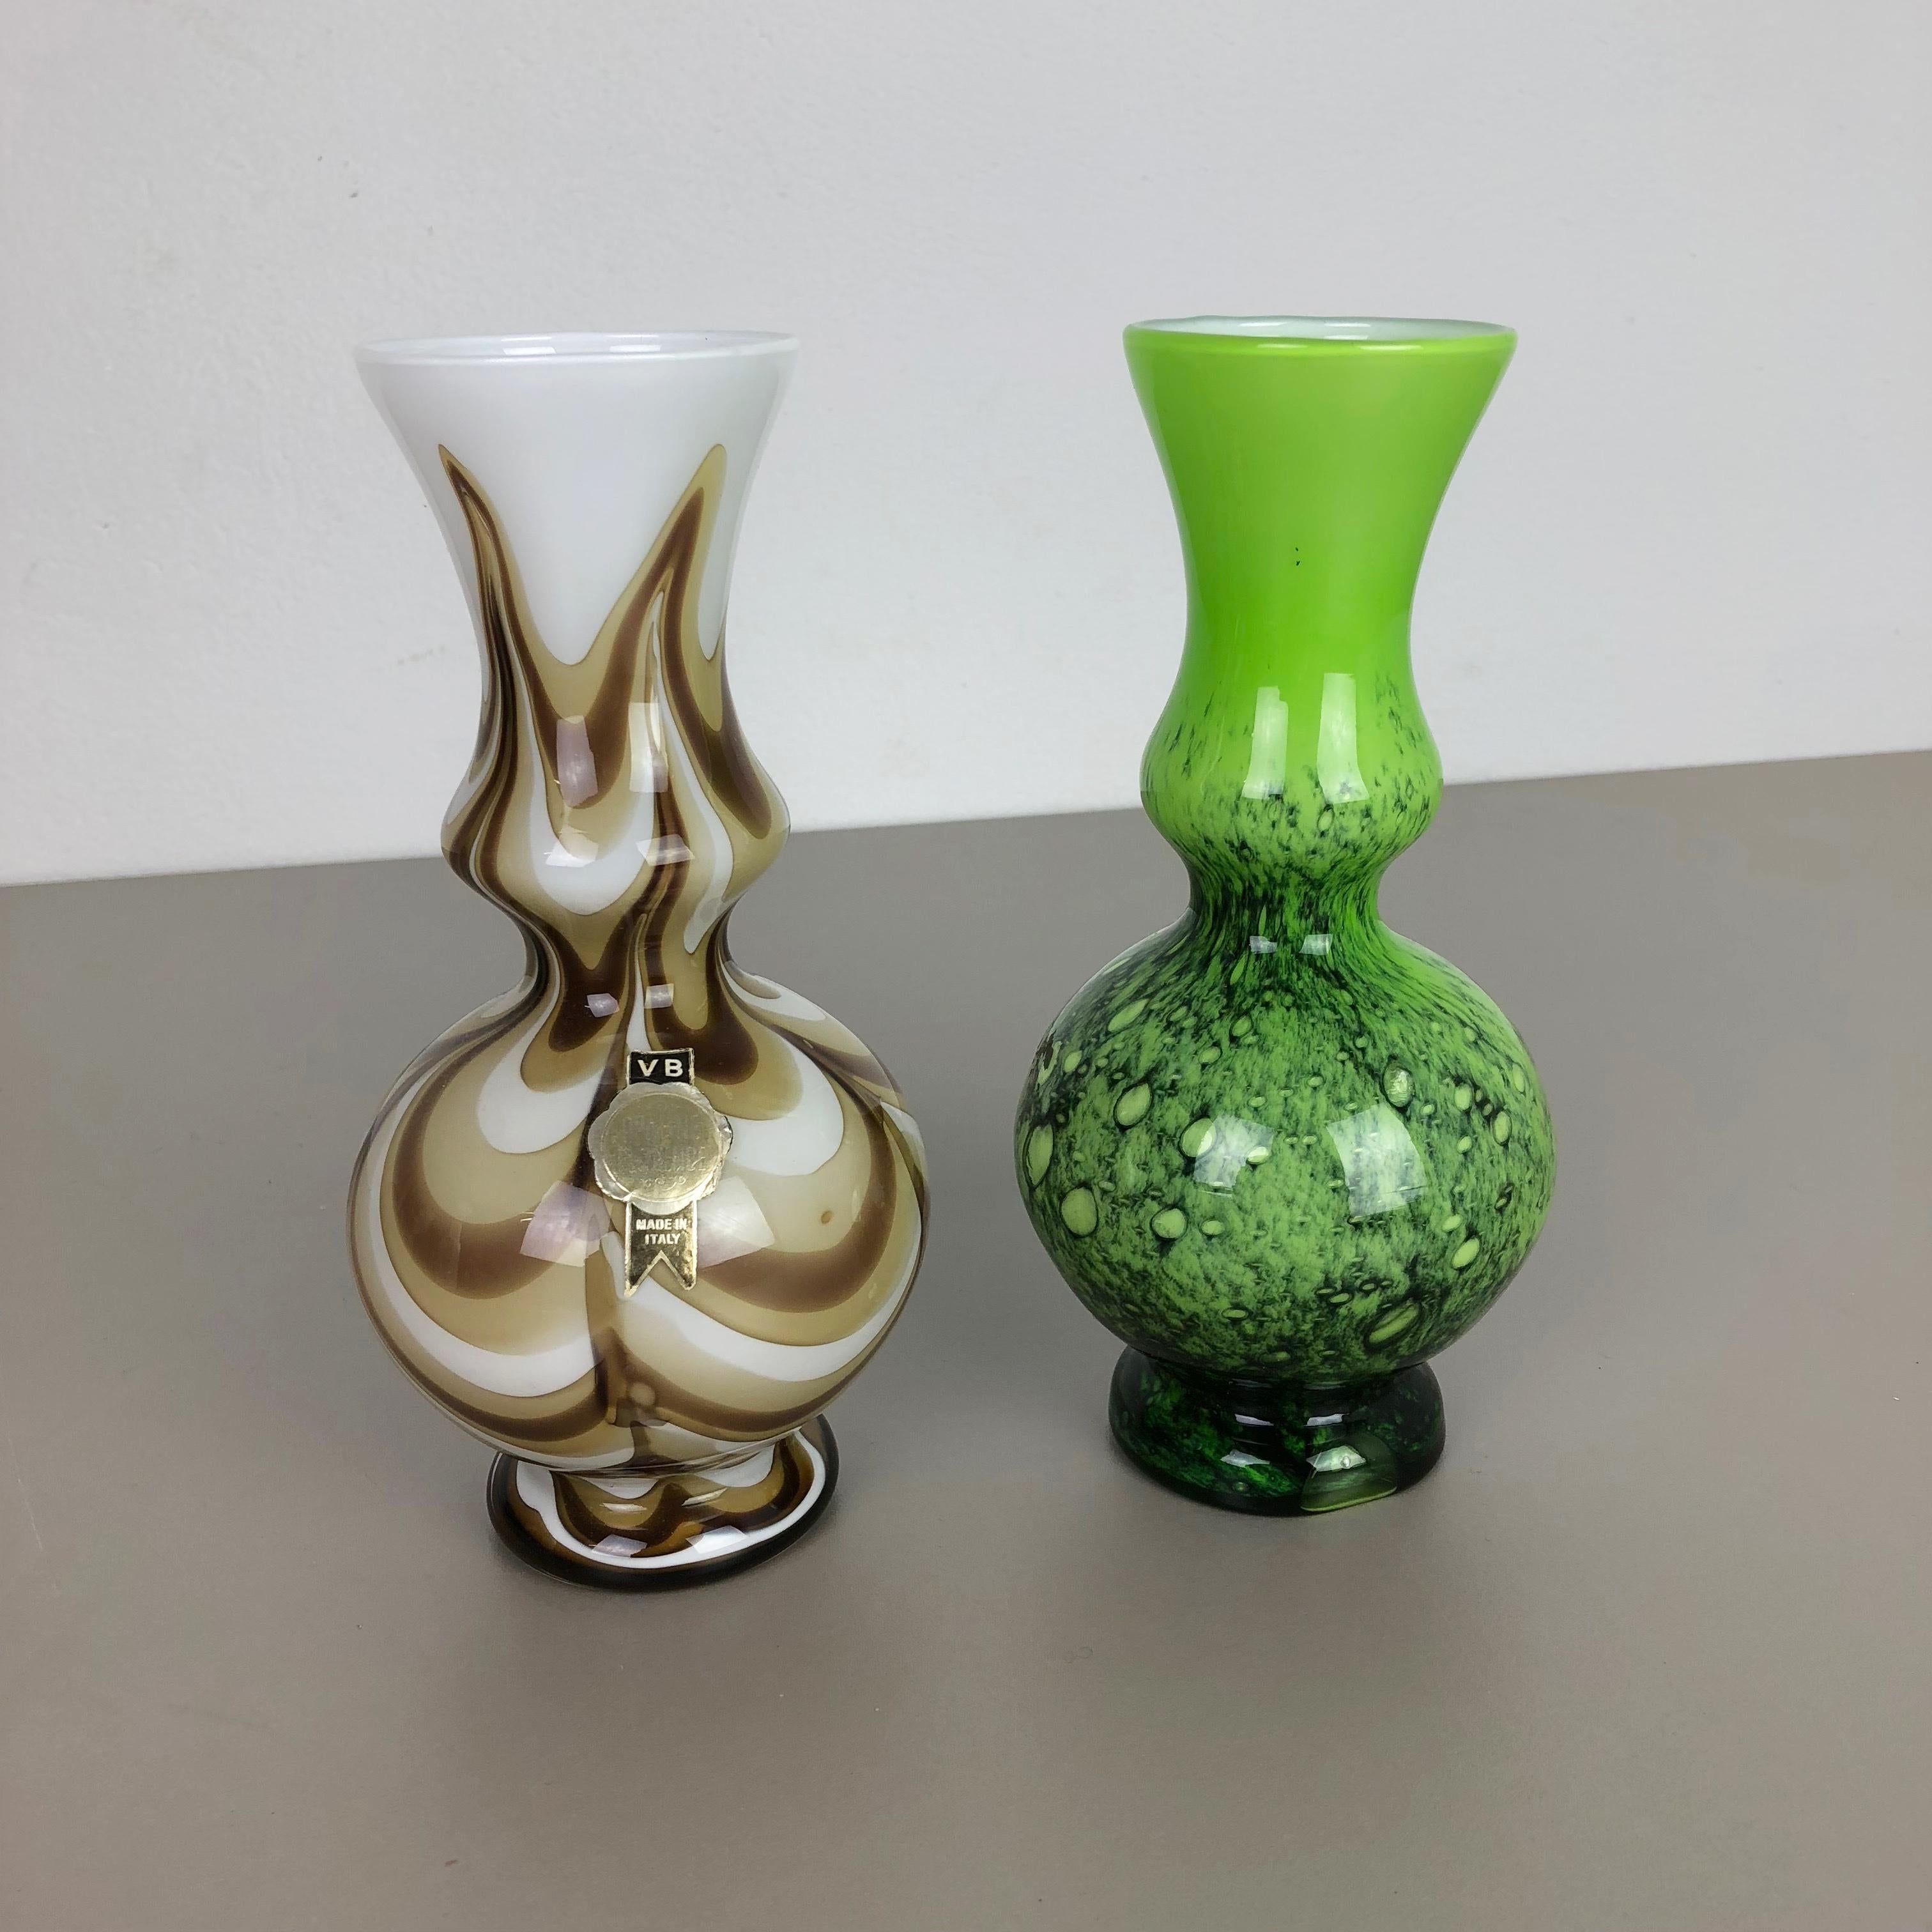 Article: Pop art vase set of 2

Producer: Opaline Florence

Design: Carlo Moretti

Decade: 1970s

Description: Original vintage 1970s Pop Art hand blown vase set made in Italy by Opaline Florence. Made of high quality Italian opal glass. The